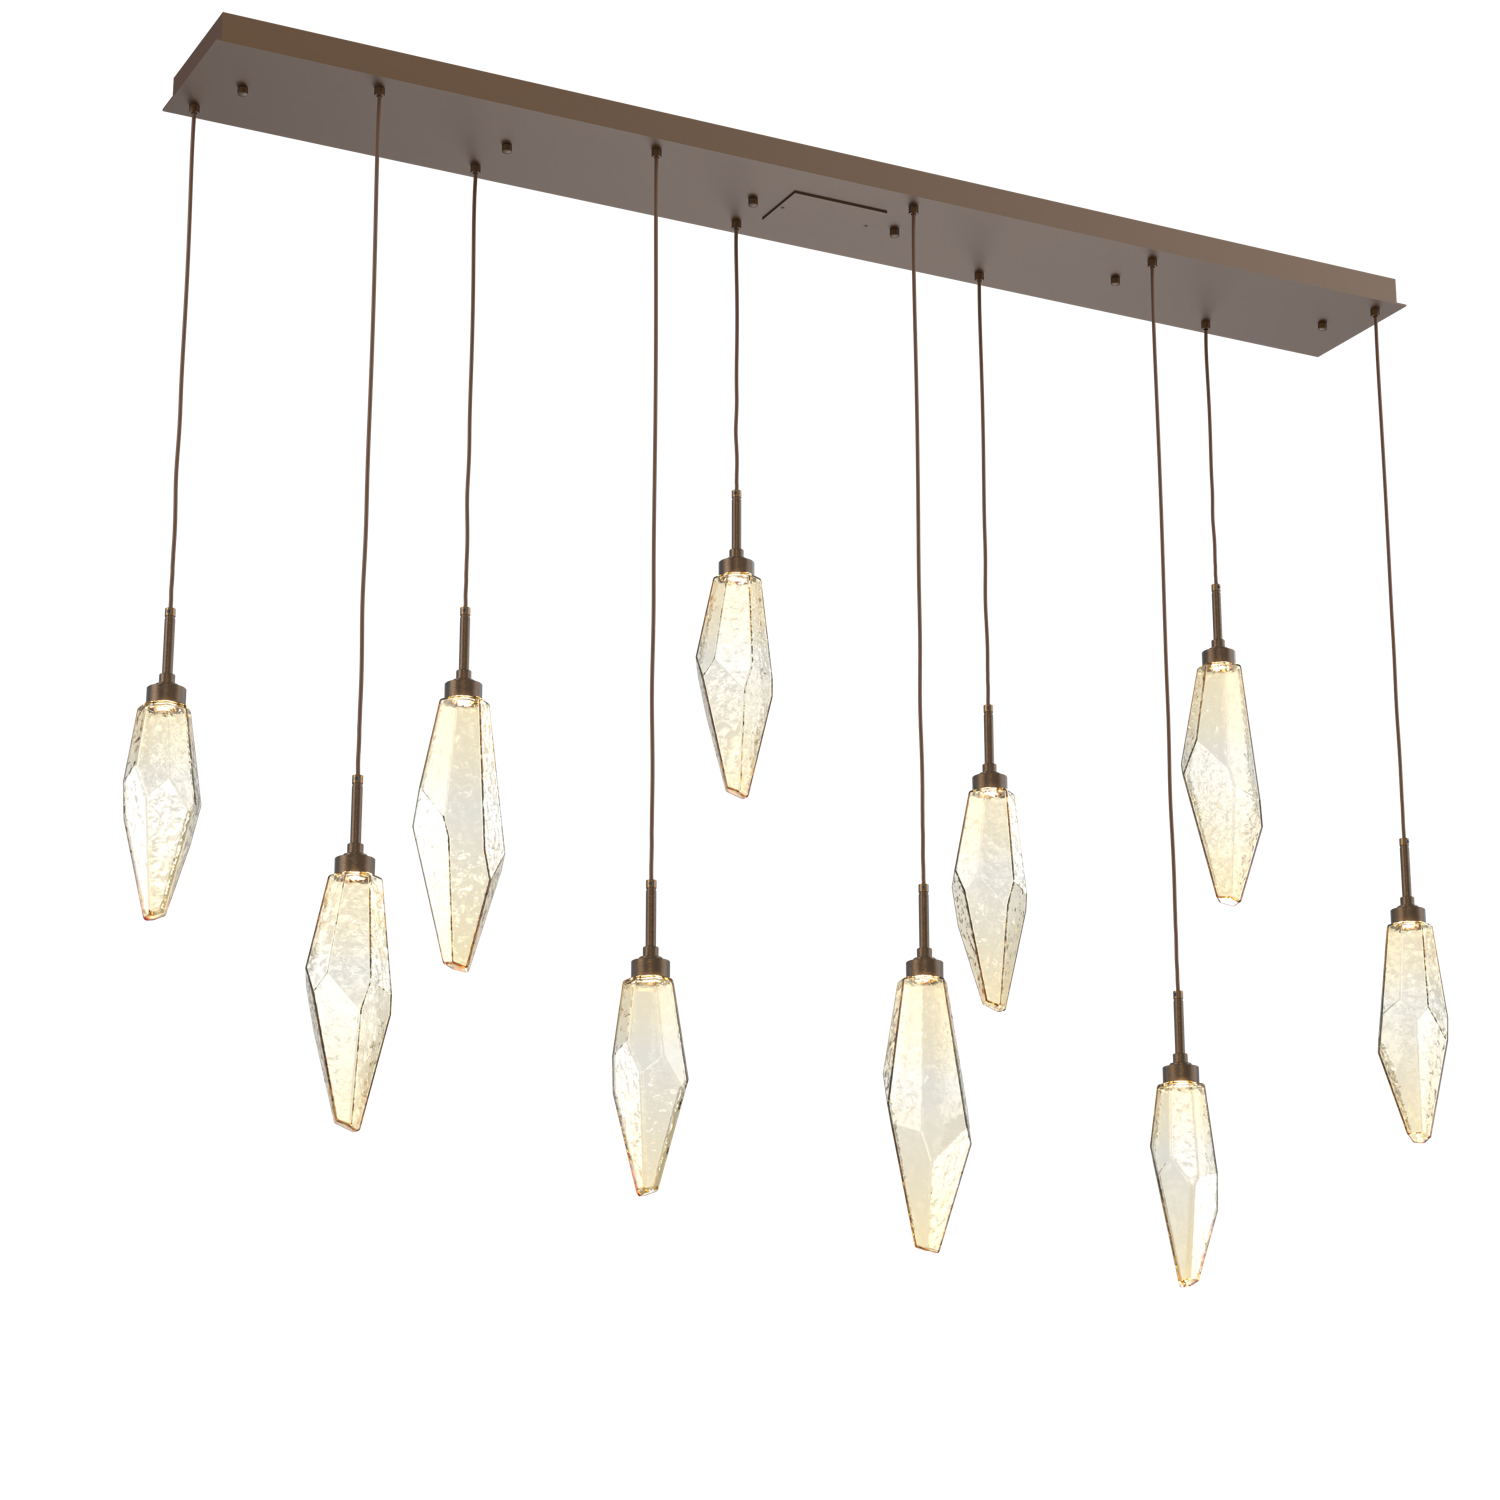 PLB0050-10-FB-CA-Hammerton-Studio-Rock-Crystal-10-light-linear-pendant-chandelier-with-flat-bronze-finish-and-chilled-amber-blown-glass-shades-and-LED-lamping